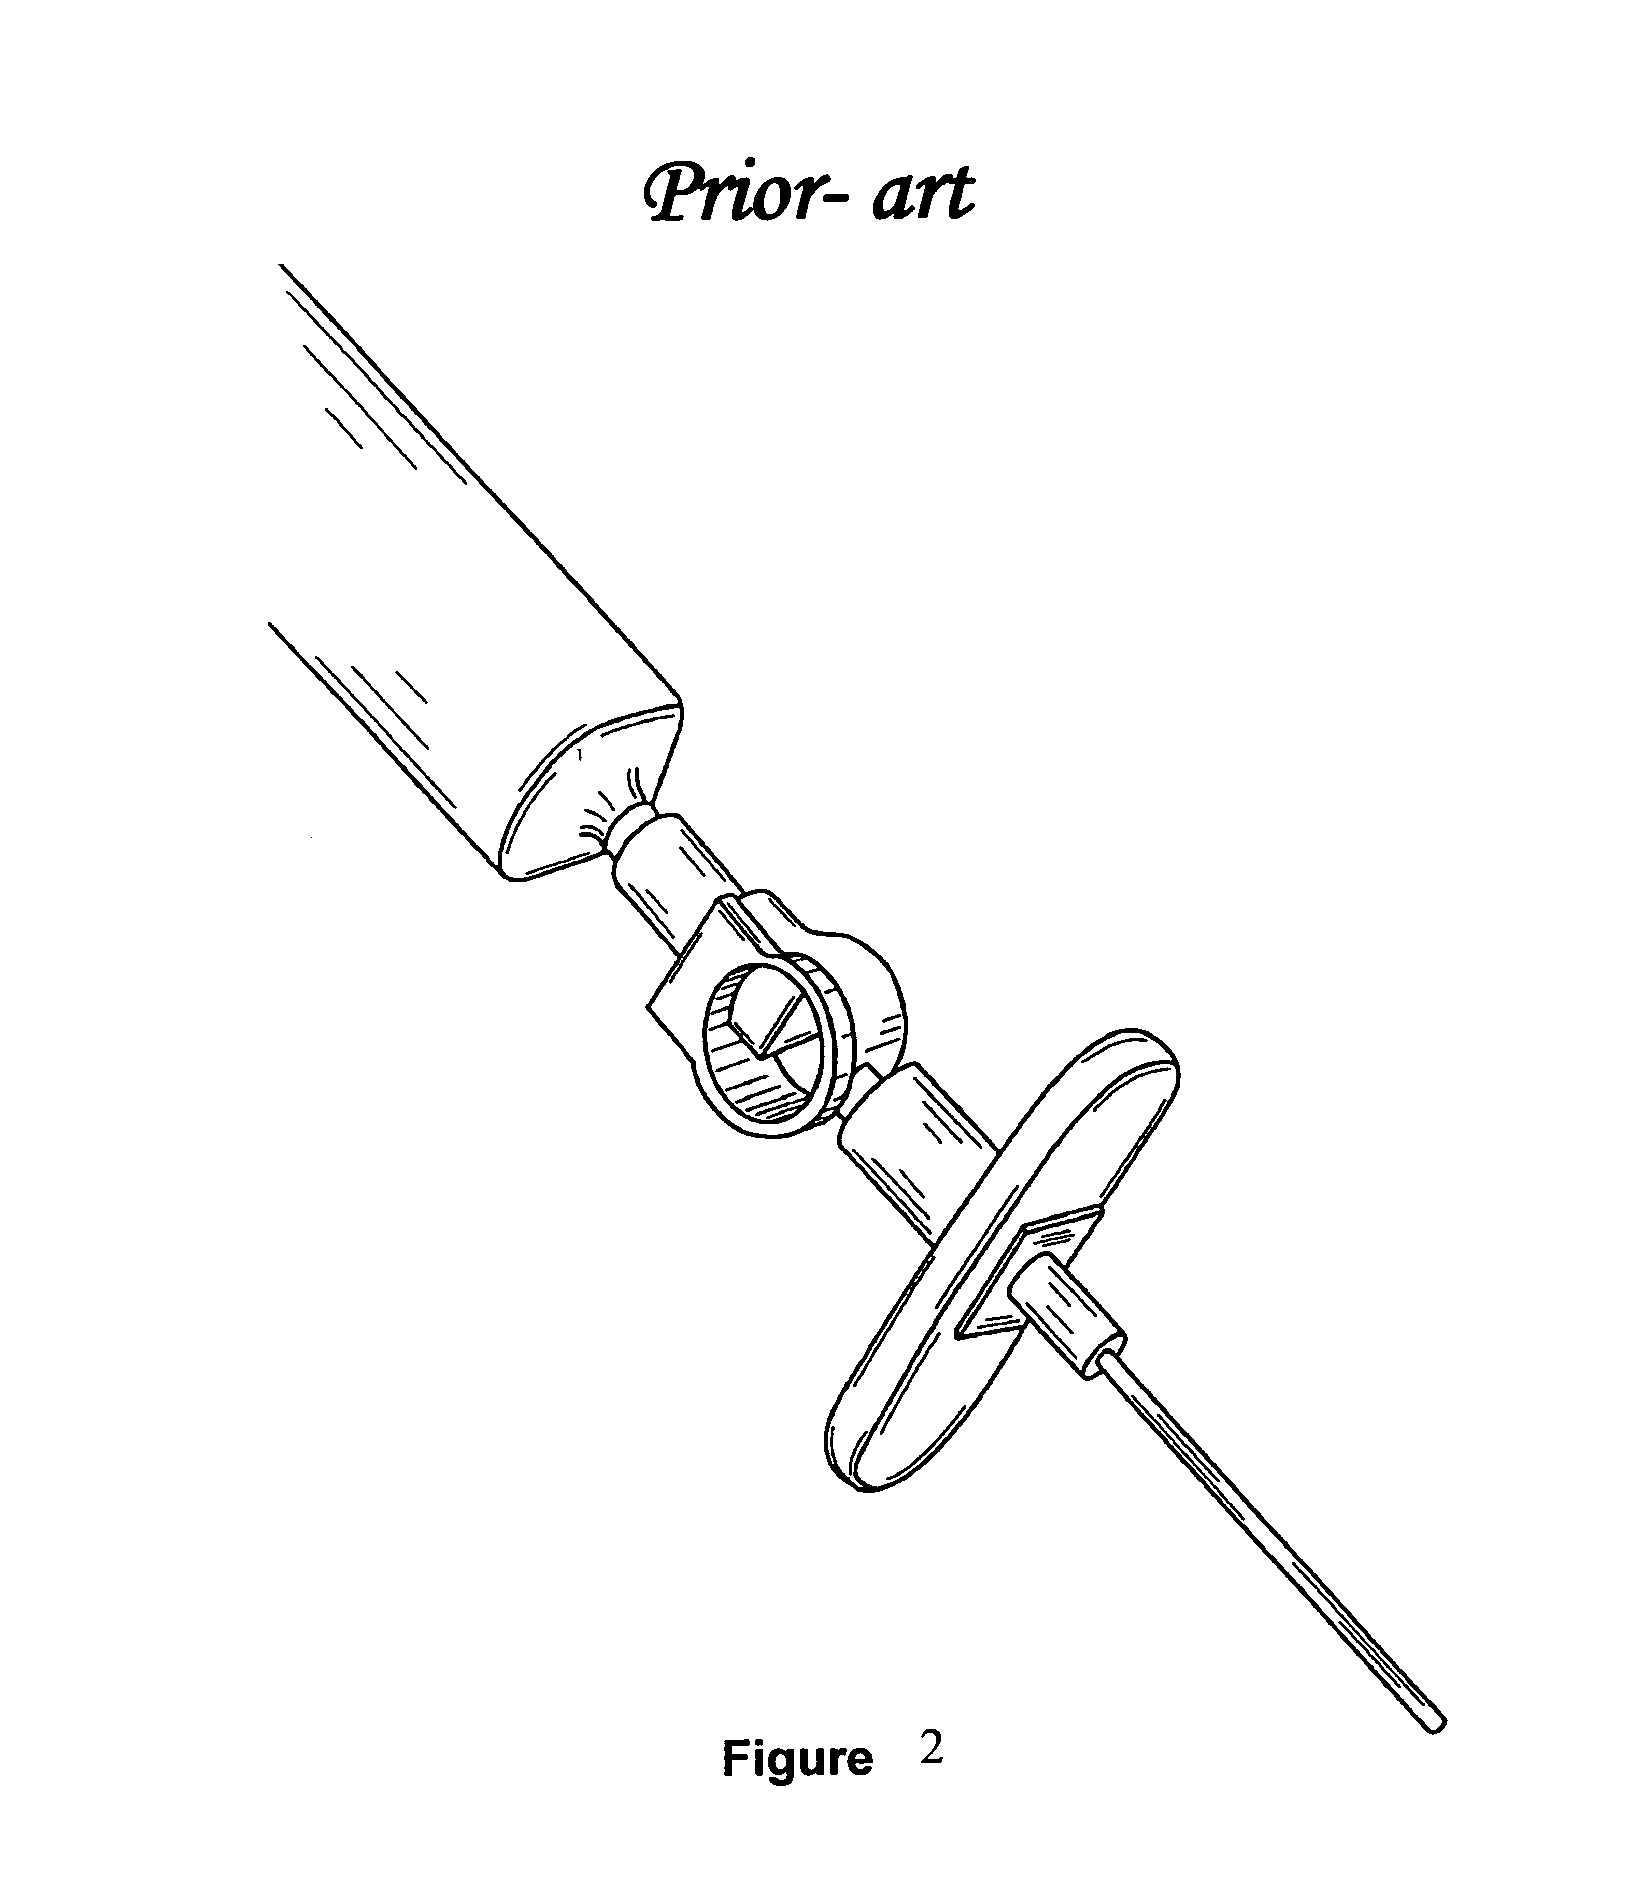 Device for locating epidural space while safeguarding against dural puncture through differential friction technique